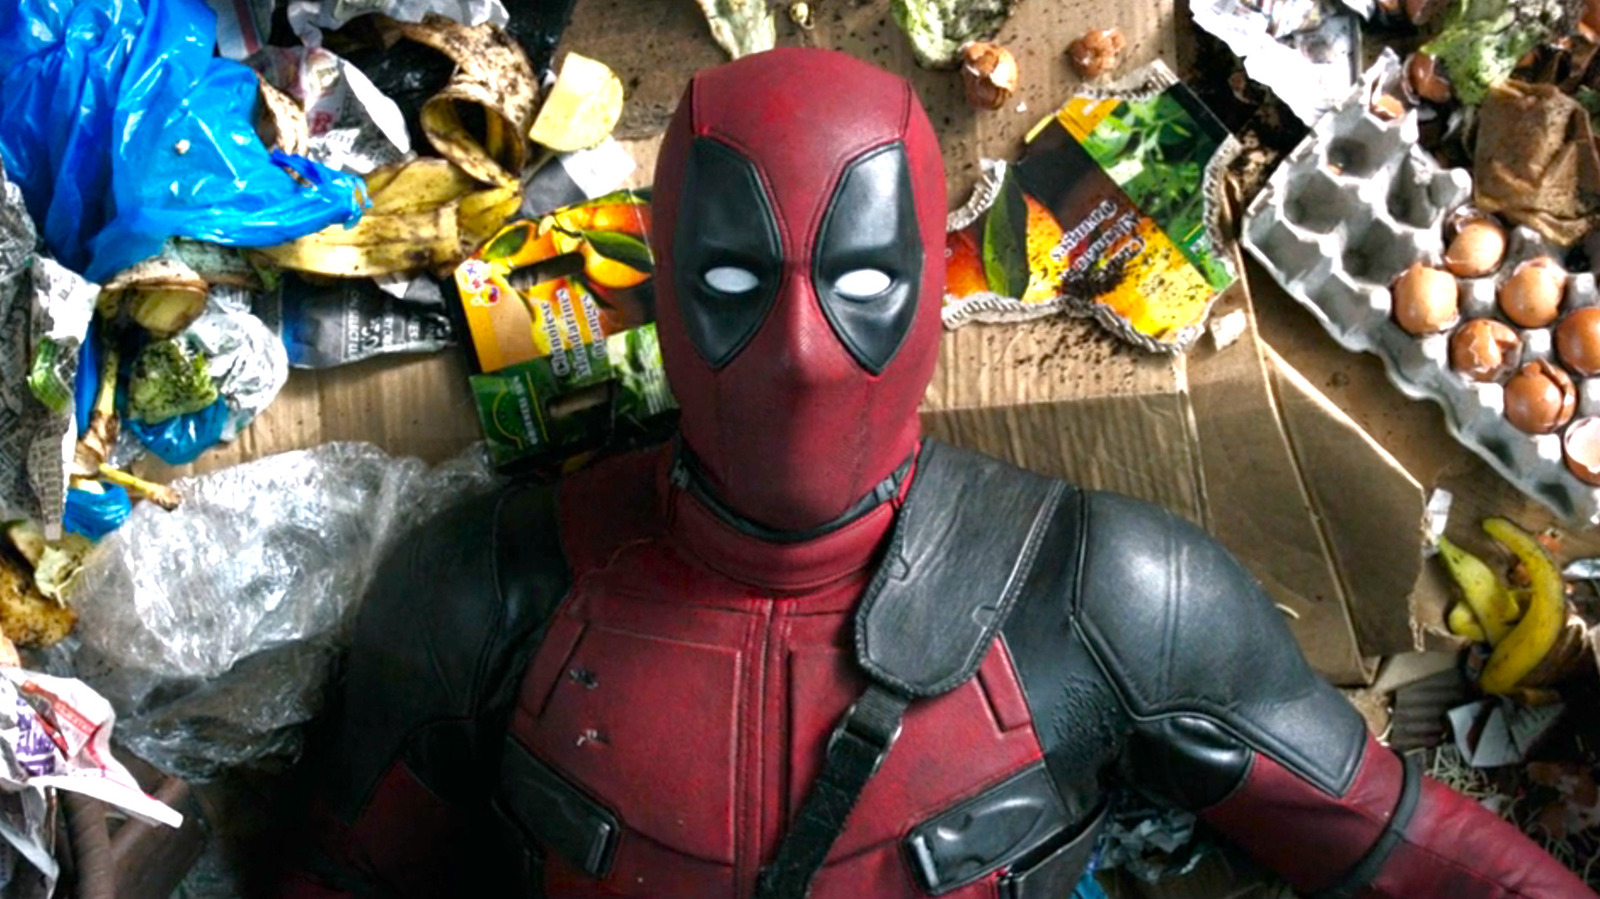 It's official: 'Deadpool 3' will be MCU's first R-rated film